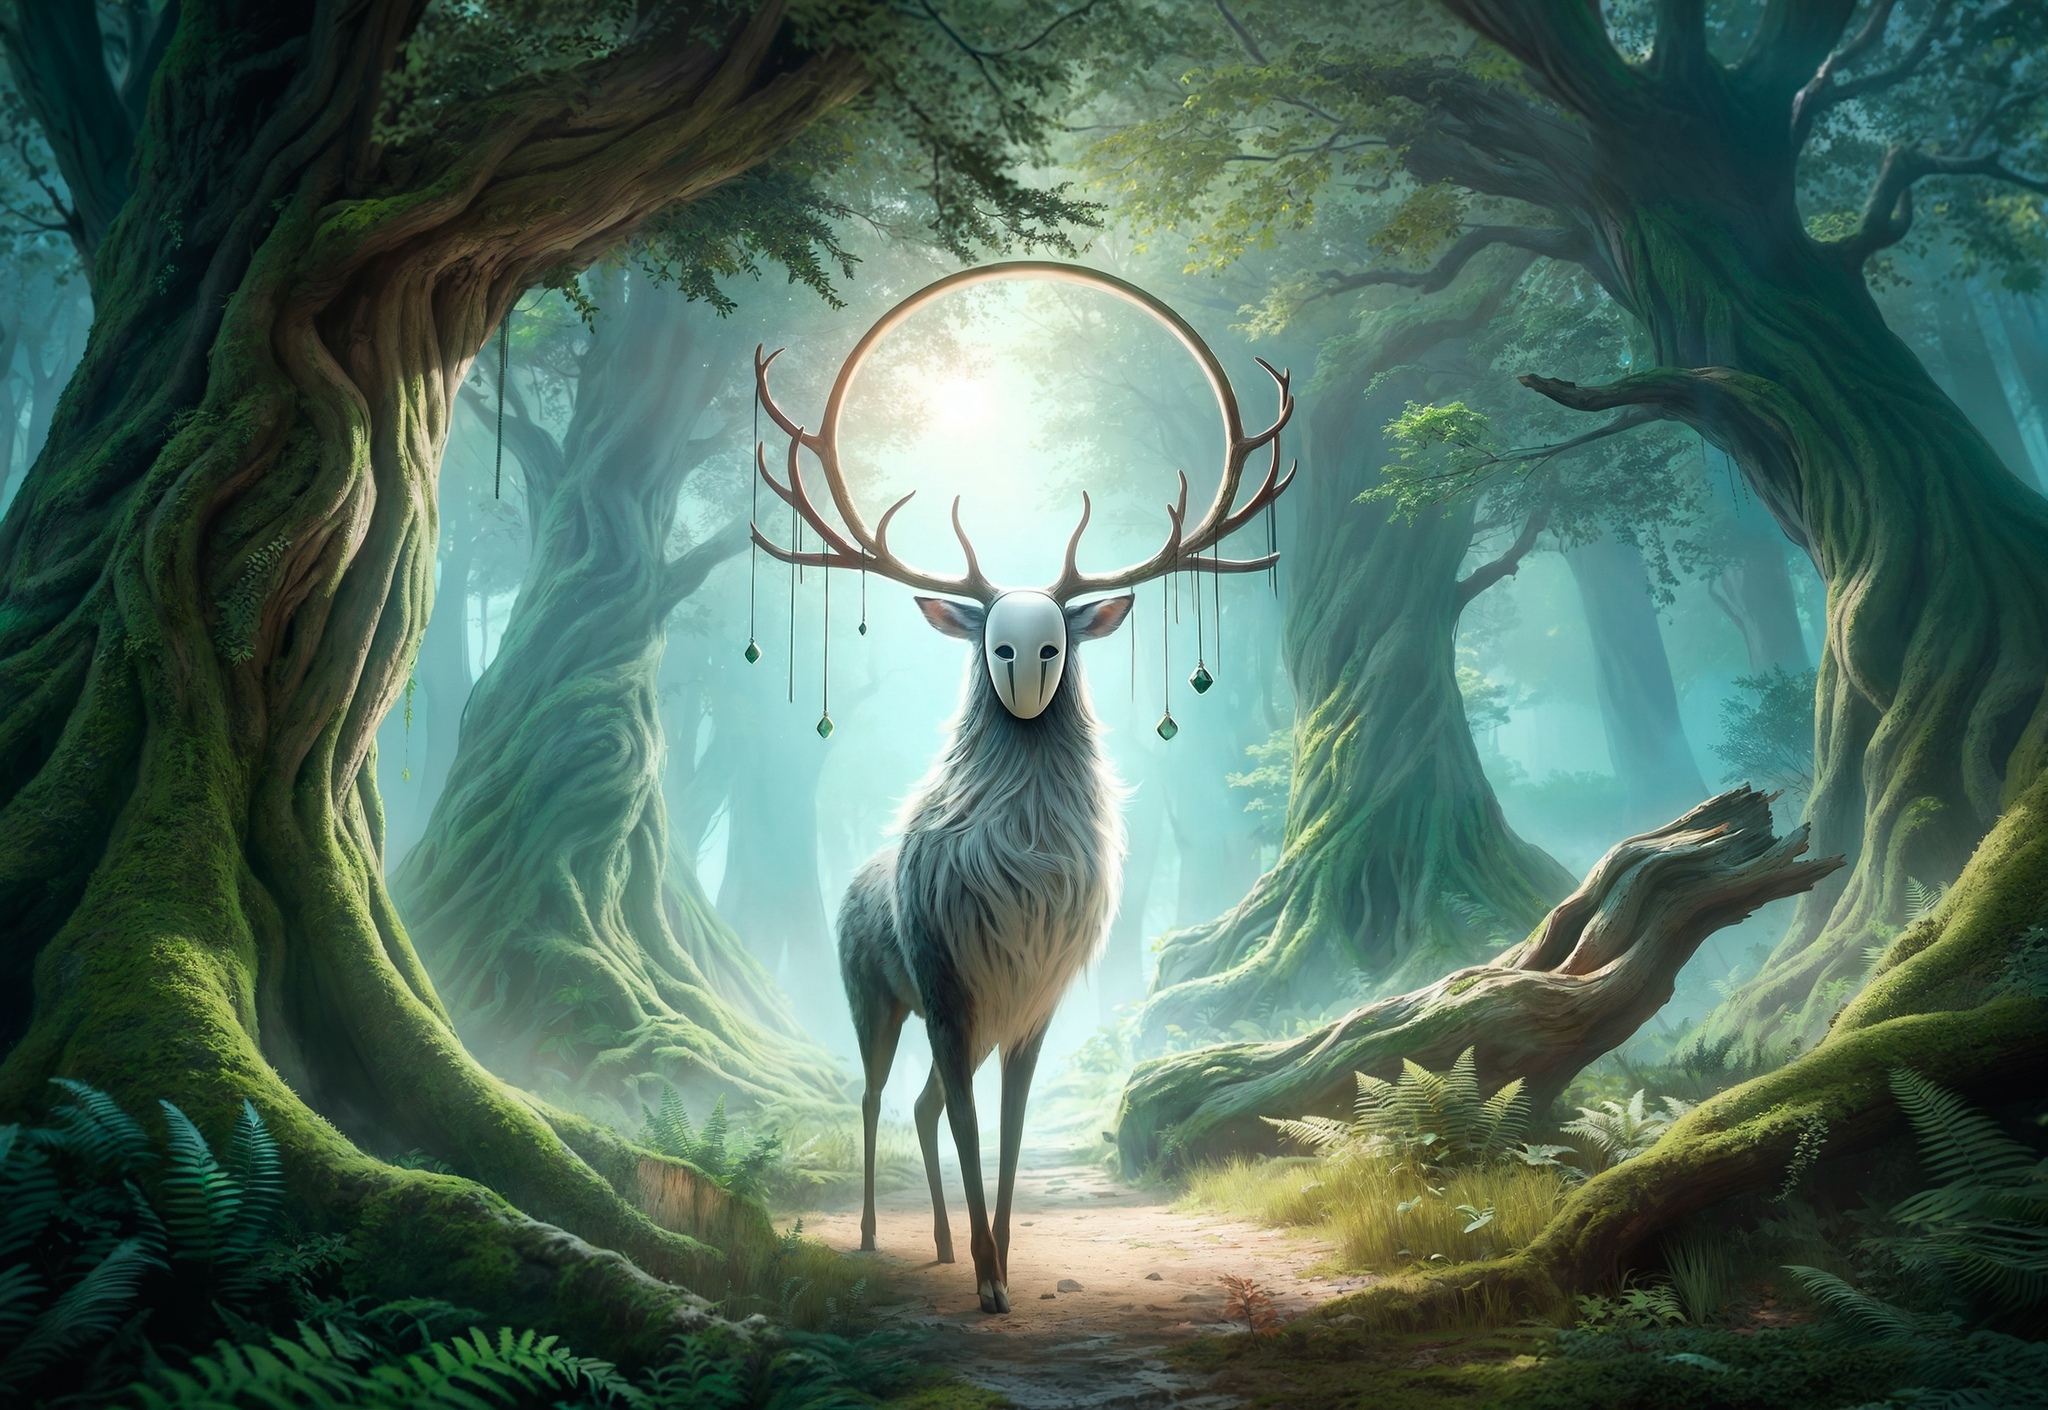 The Endless Forest - Telegram (link), Art, Desktop wallpaper, Characters (edit), Photoshop, Stable diffusion, Dall-e, Magical forest, Magic, Magic, Deer, Fantasy, Folklore, The Endless Forest, Neural network art, Midjourney